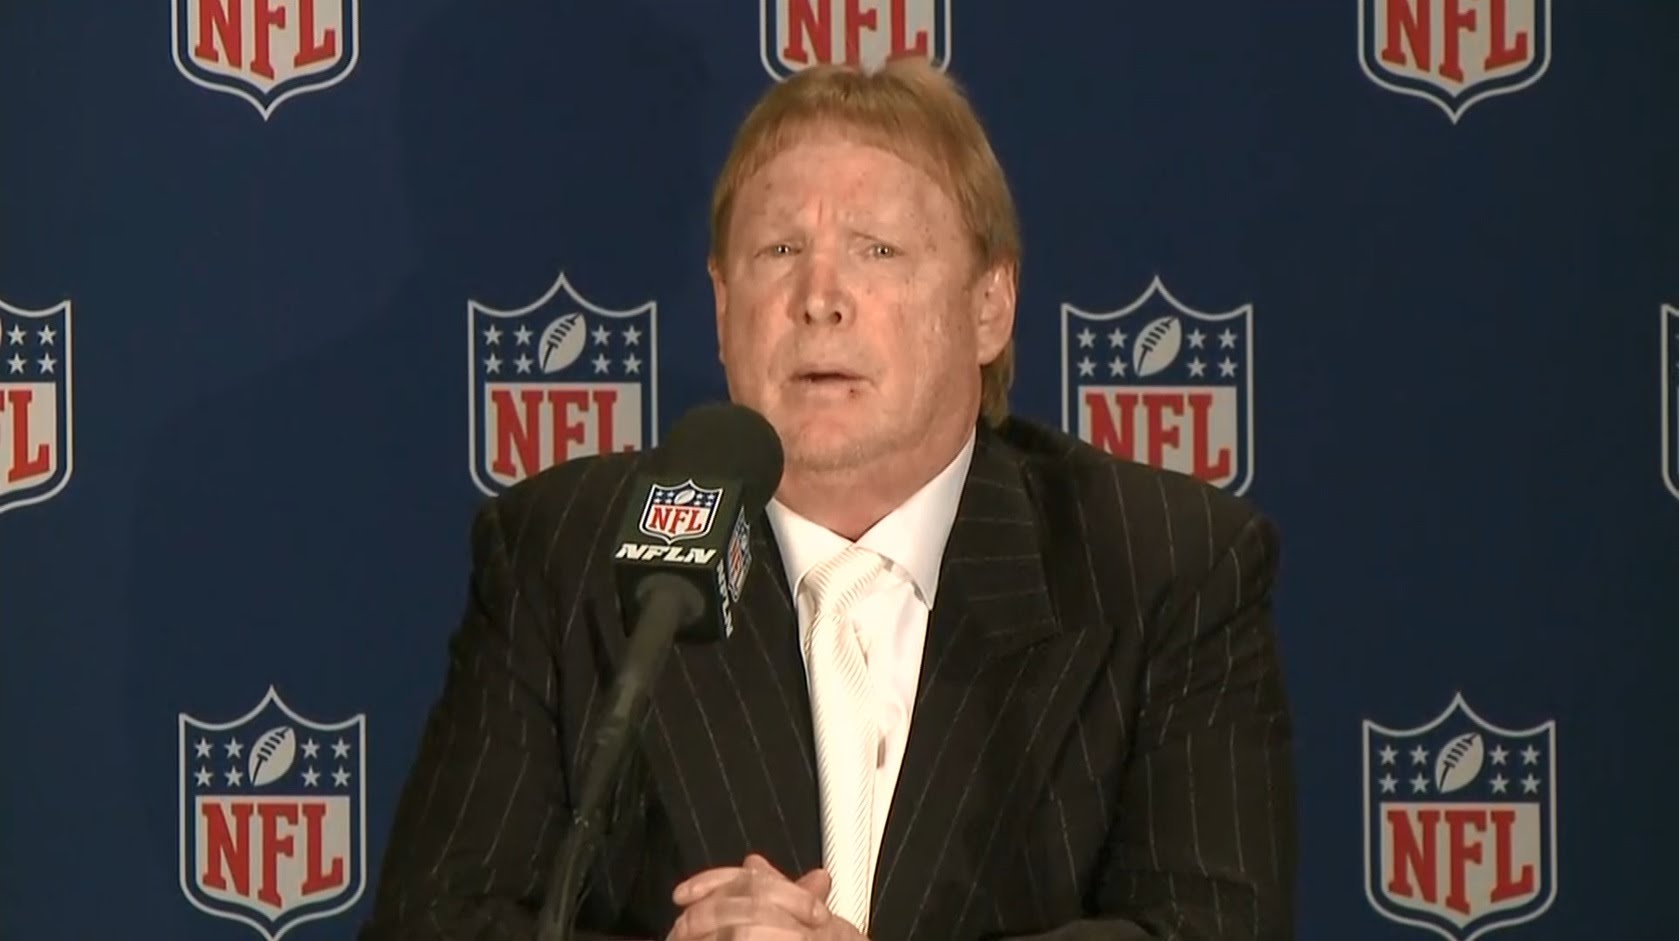 Raiders owner Mark Davis speaks on the NFL's approval of move to Las Vegas